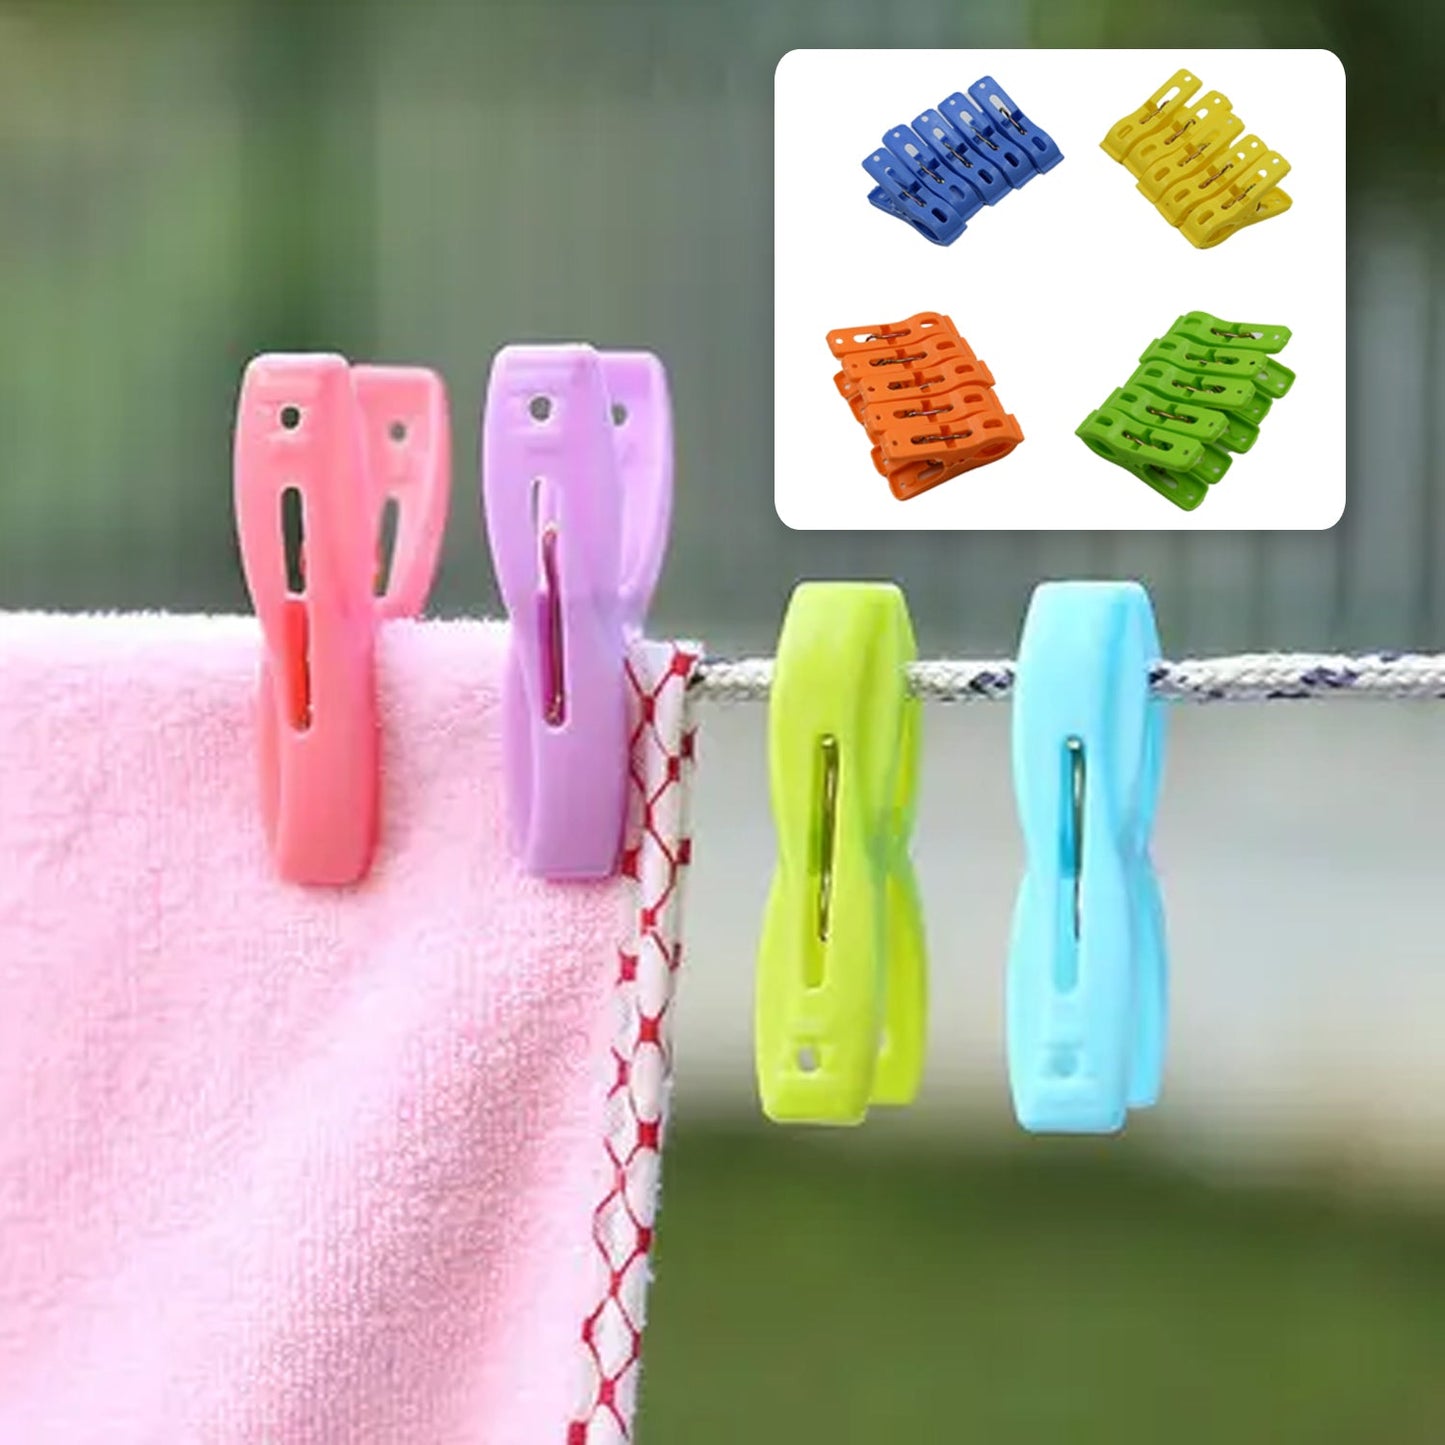 7893 Multifunction Plastic Heavy Quality Cloth Hanging Clips, Plastic Laundry Clothes Pins Set of 20 Pieces